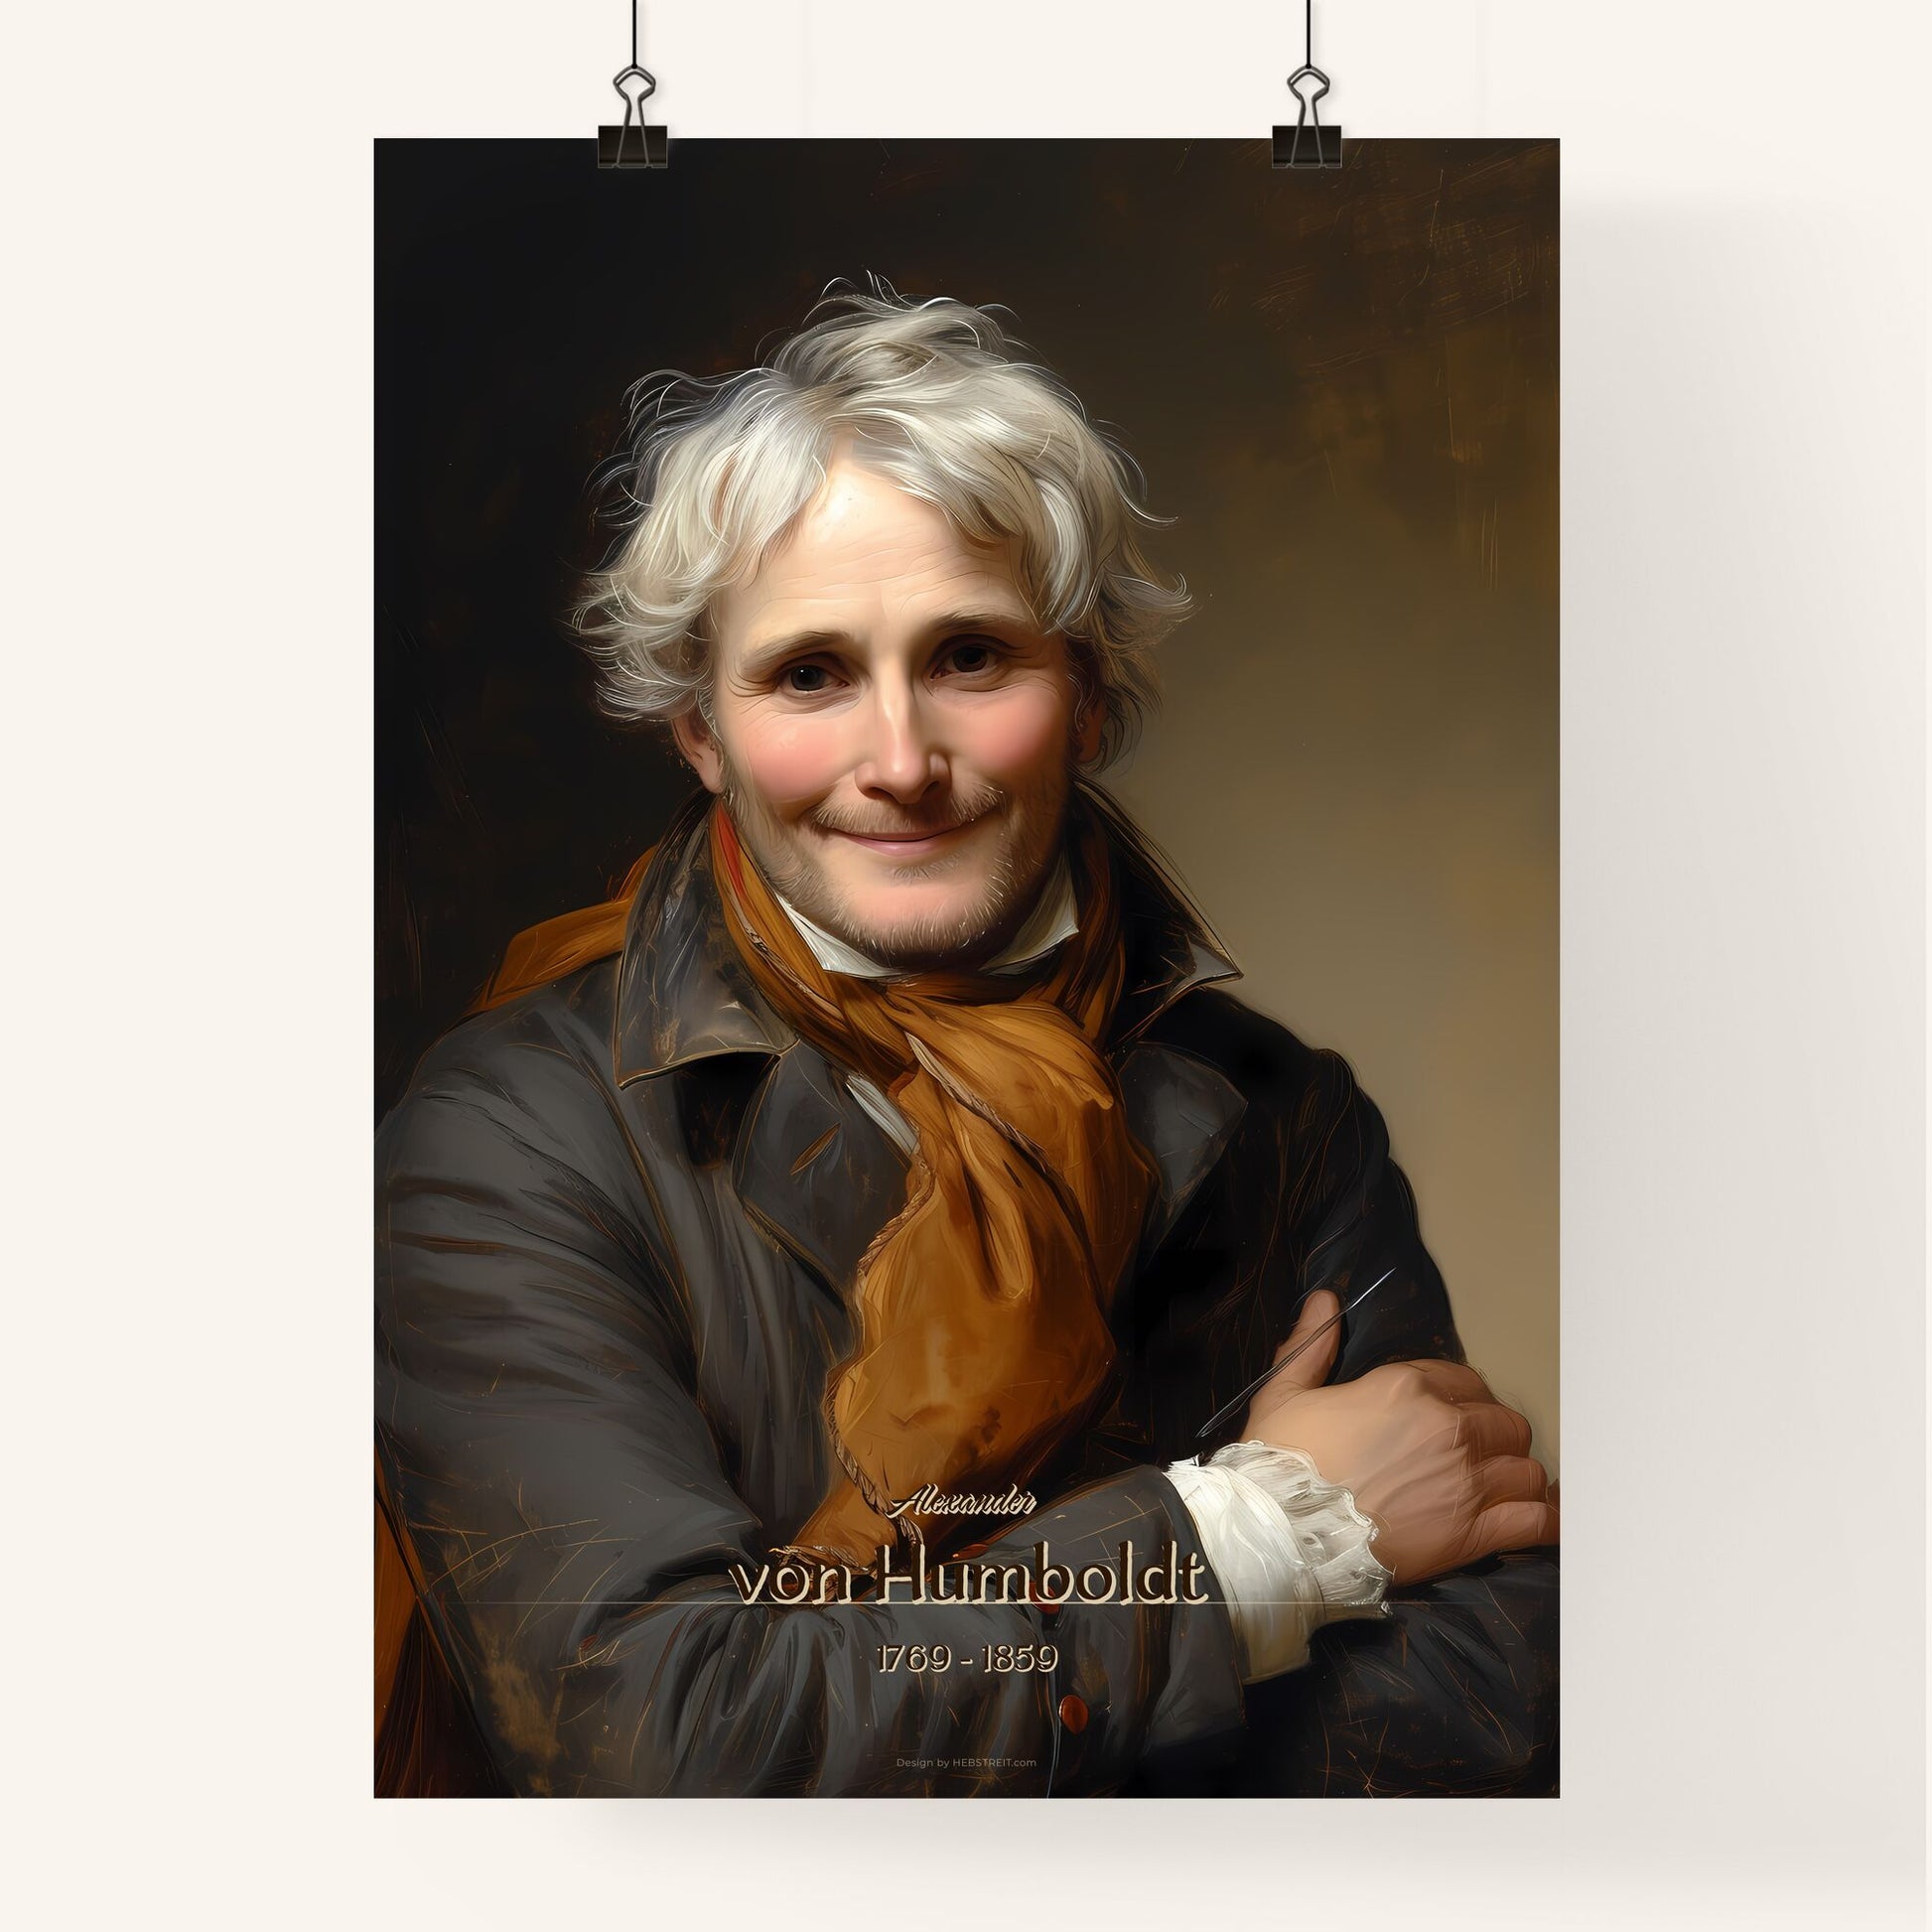 Alexander, von Humboldt, 1769 - 1859, A Poster of a man with white hair and a brown scarf Default Title